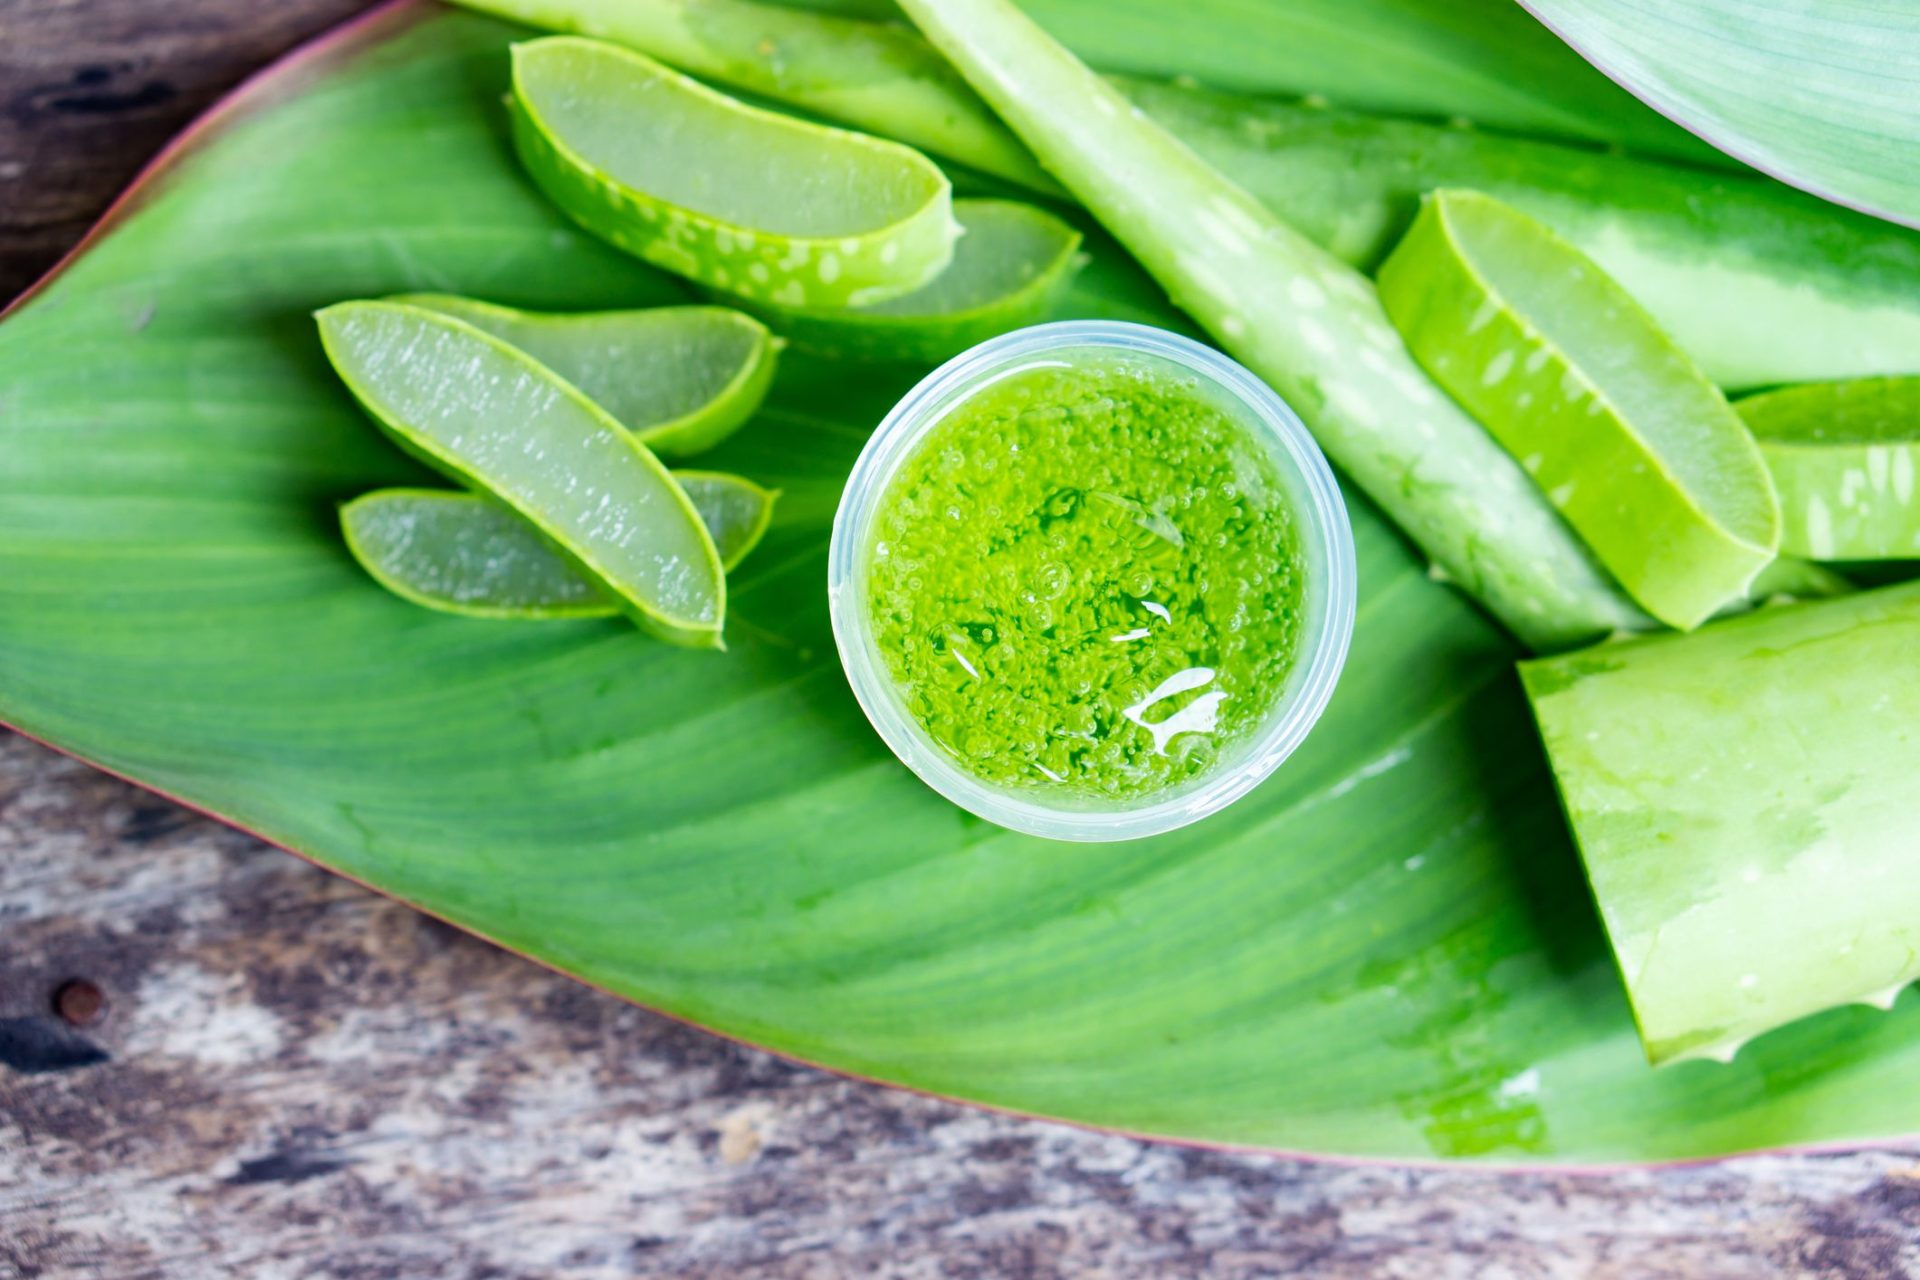 Aloe vera will be useful to the extent that health benefits